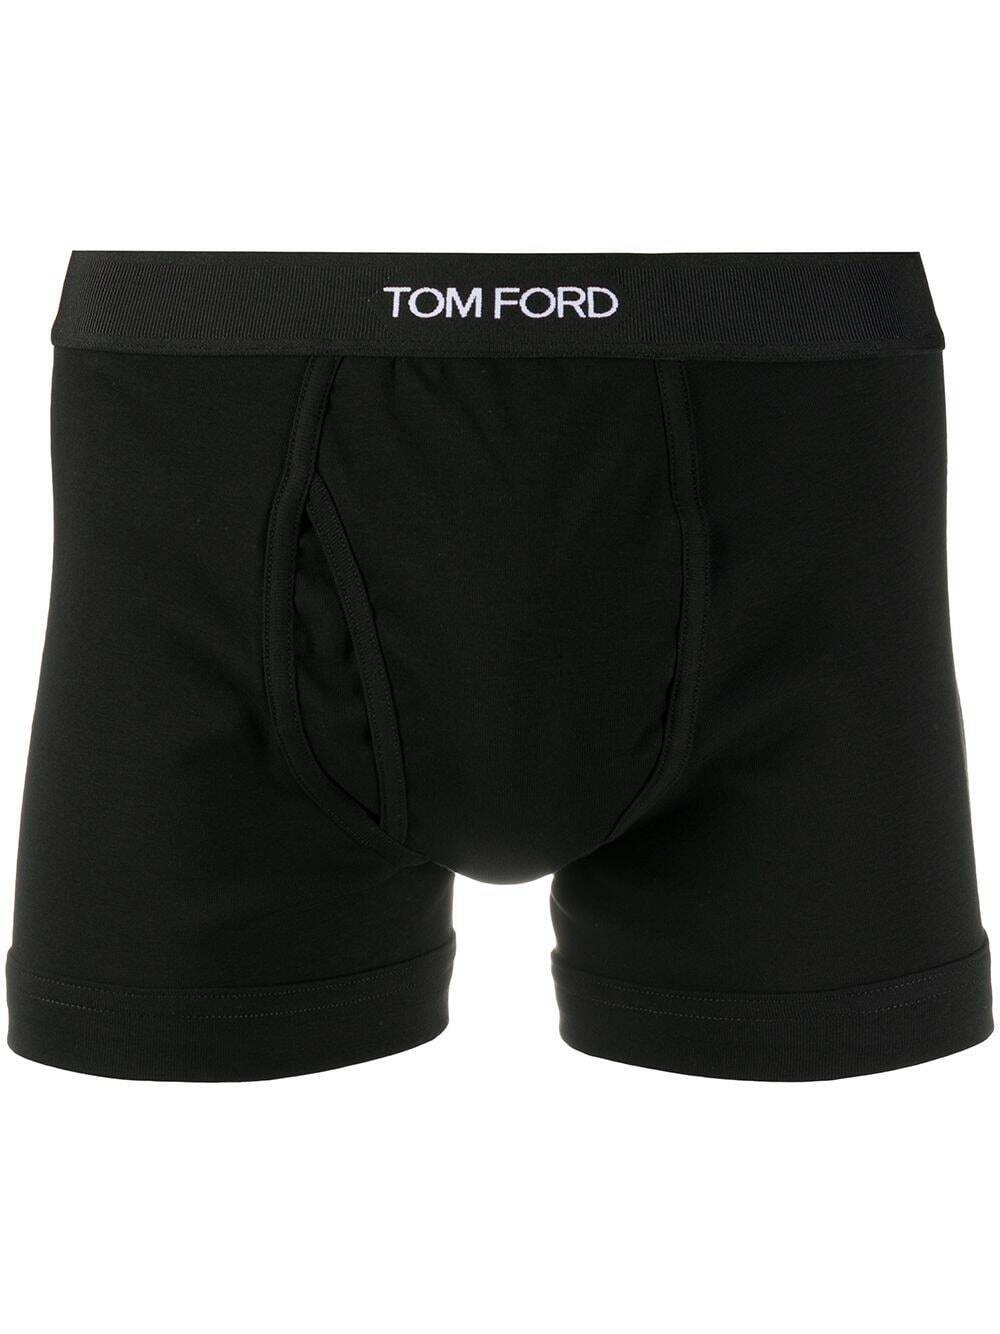 TOM FORD - Cotton Boxers TOM FORD